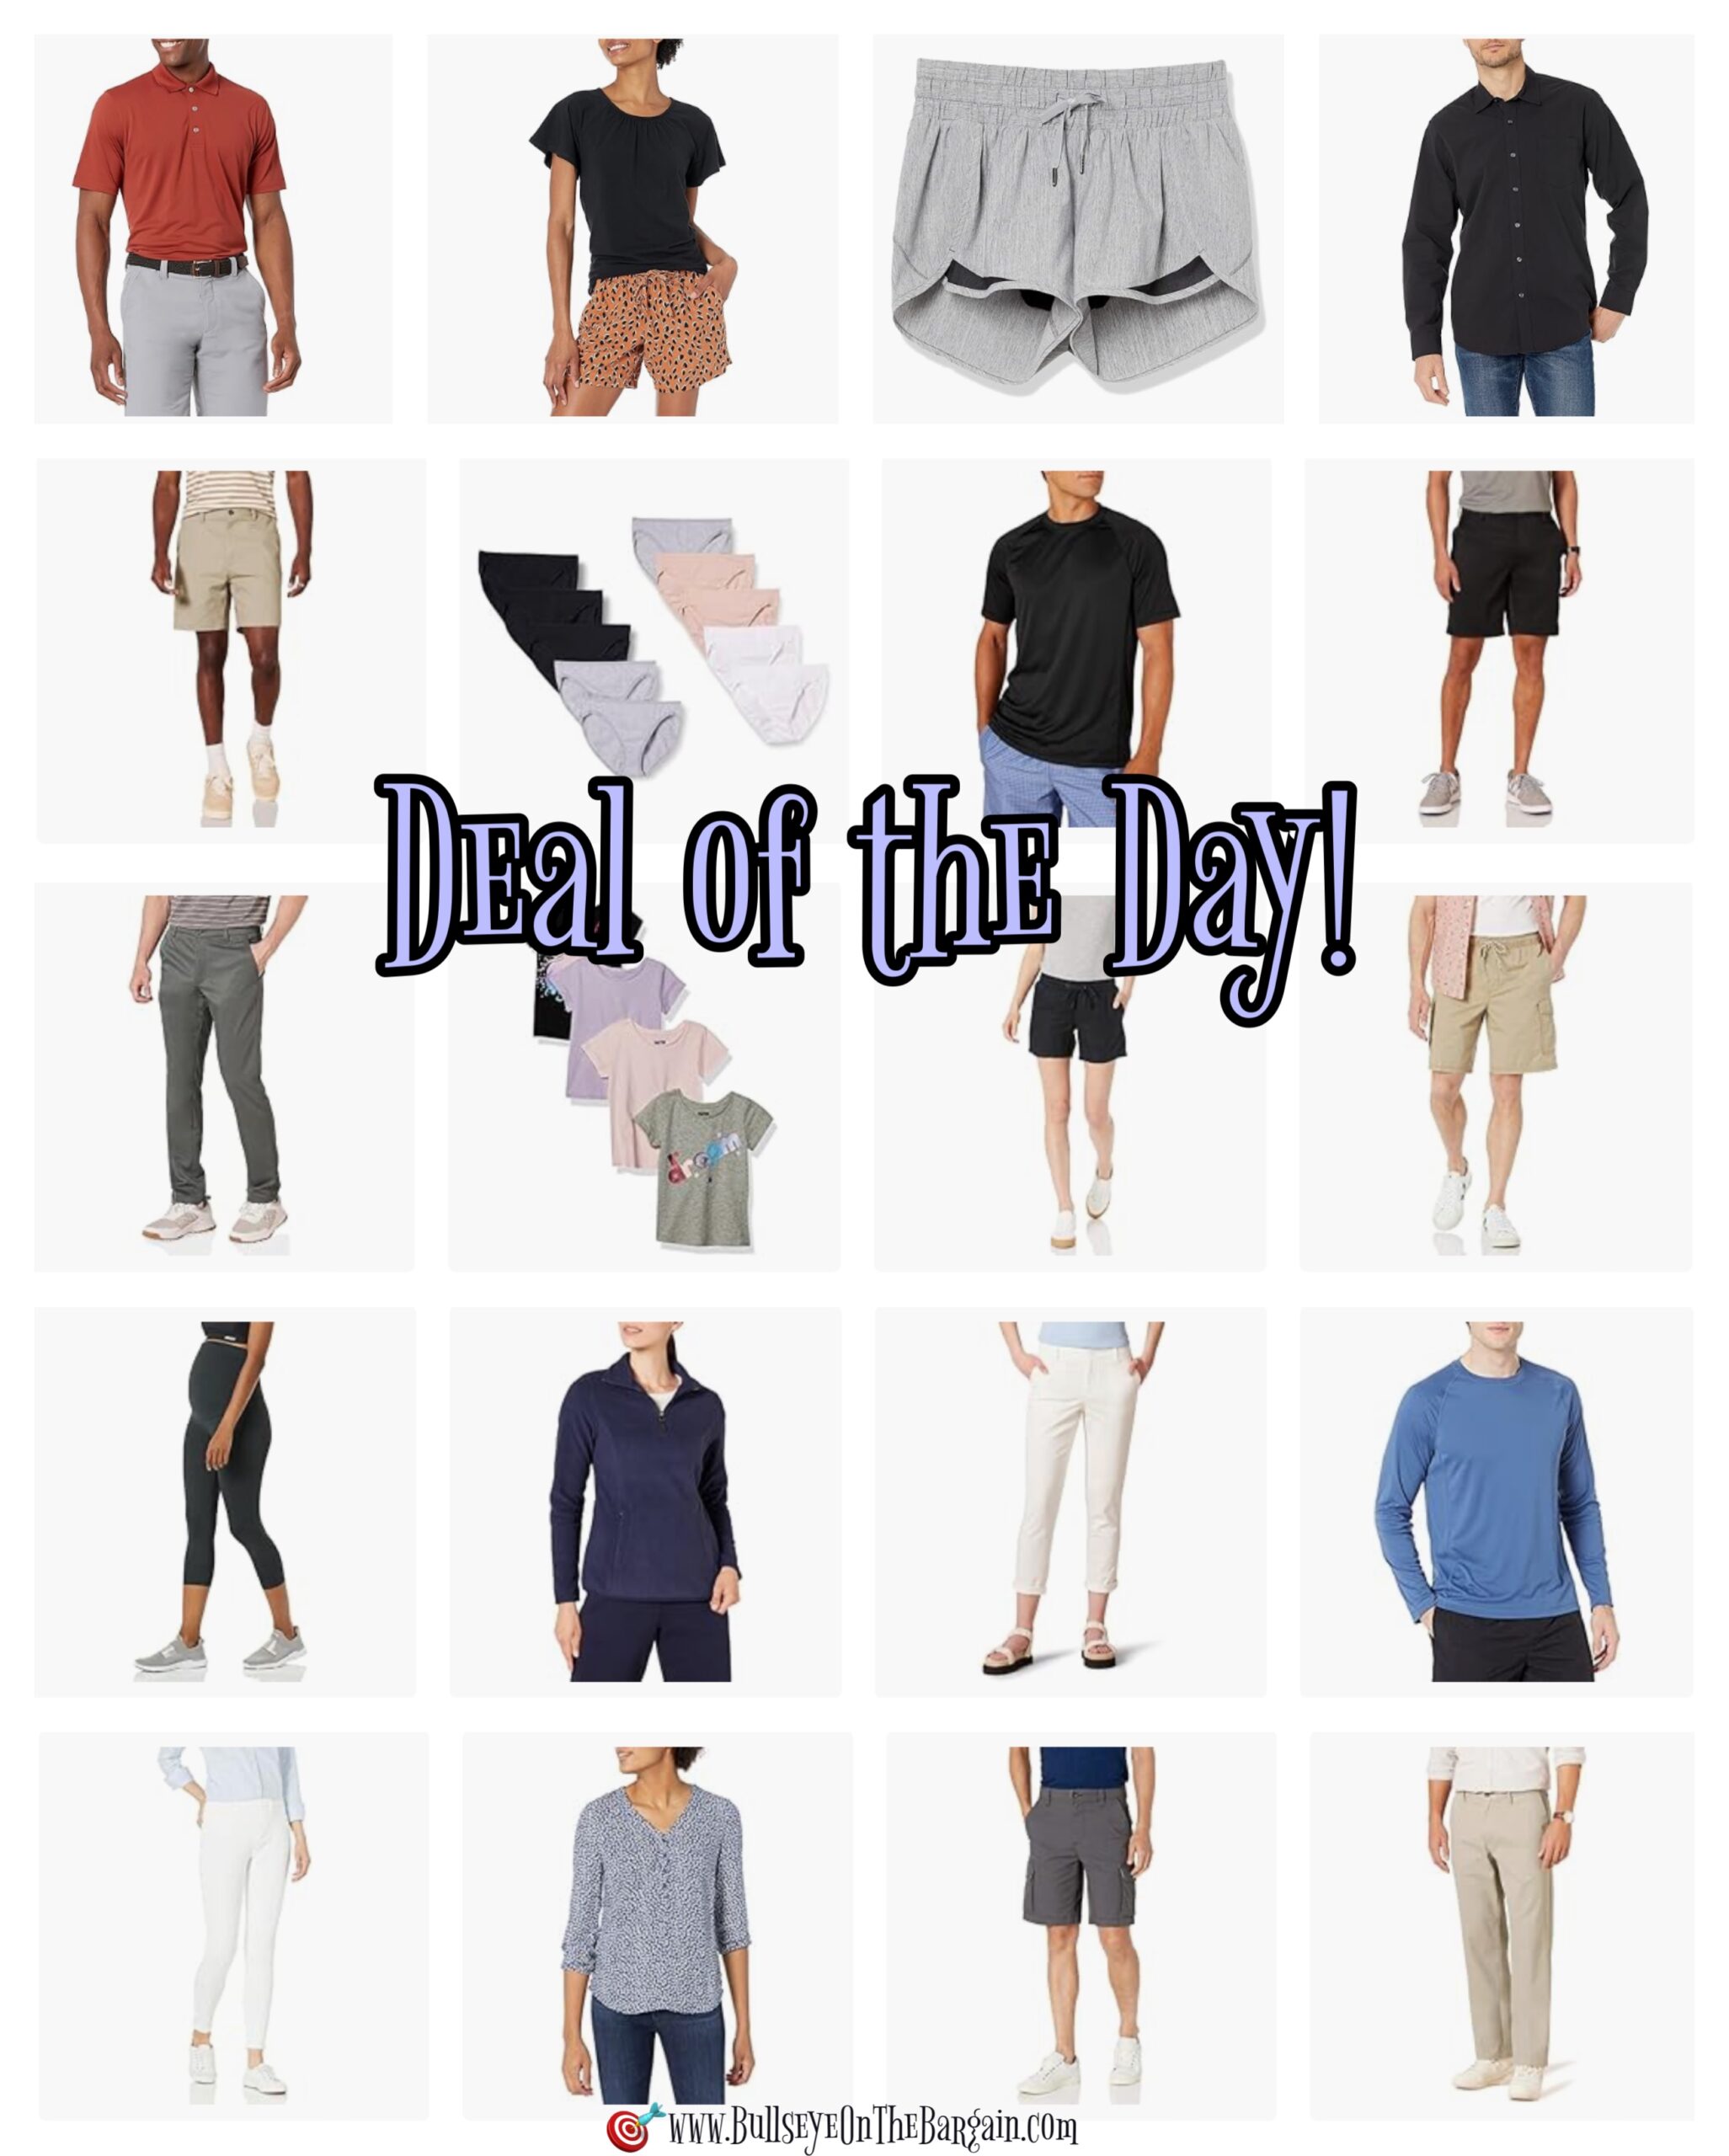 Men and Womens Clothes are on DEAL OF THE DAY!